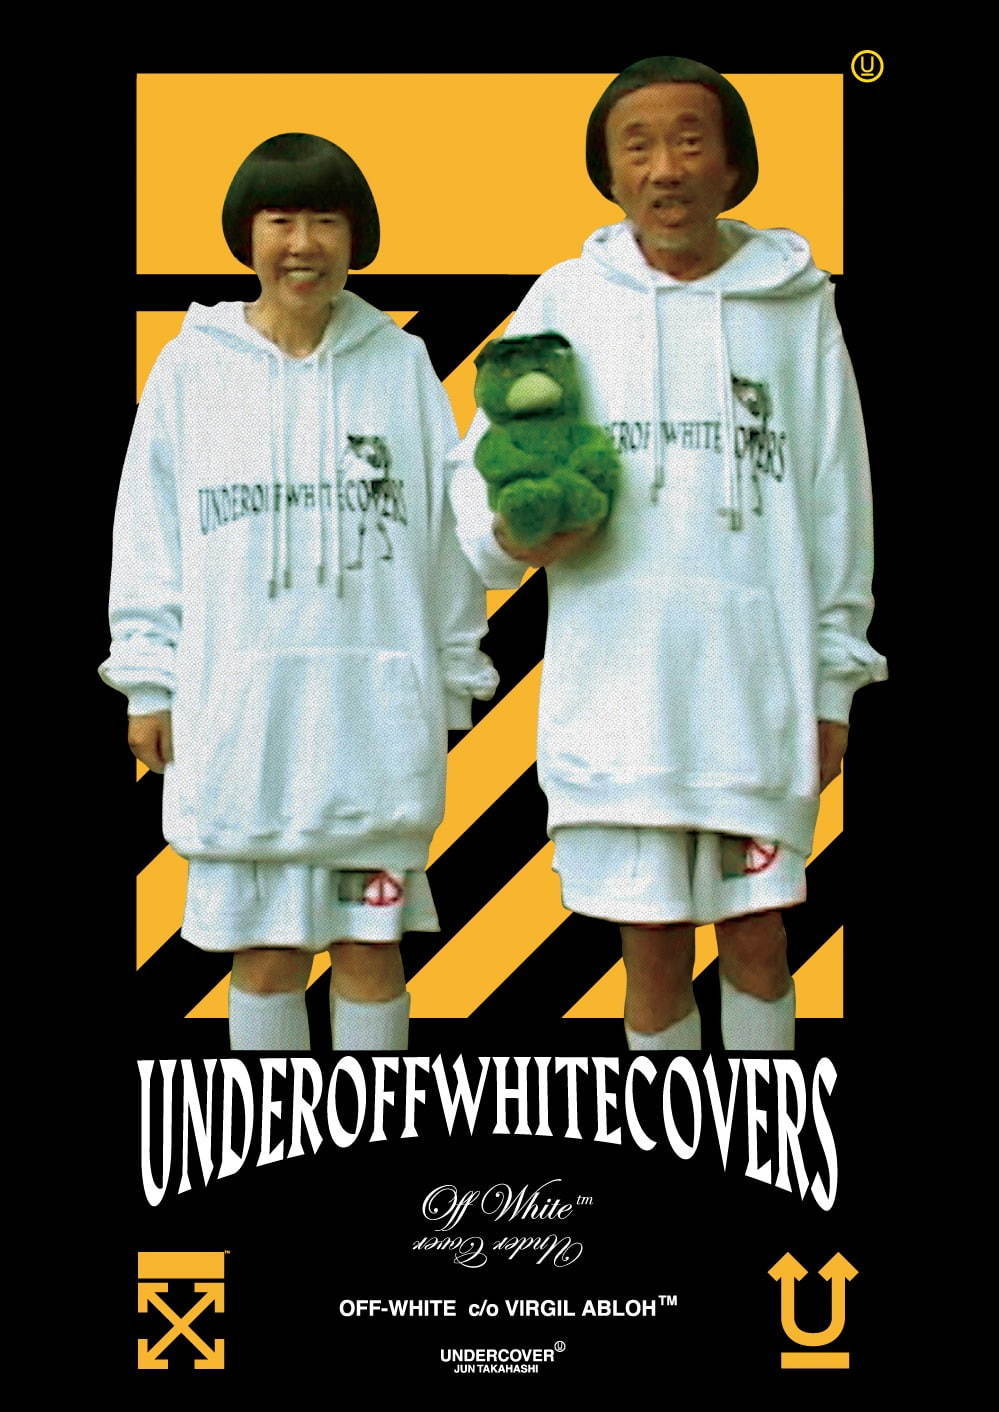 UNDERCOVER × OFF-WHITE 19AW コラボアイテムが9/14に国内発売予定 